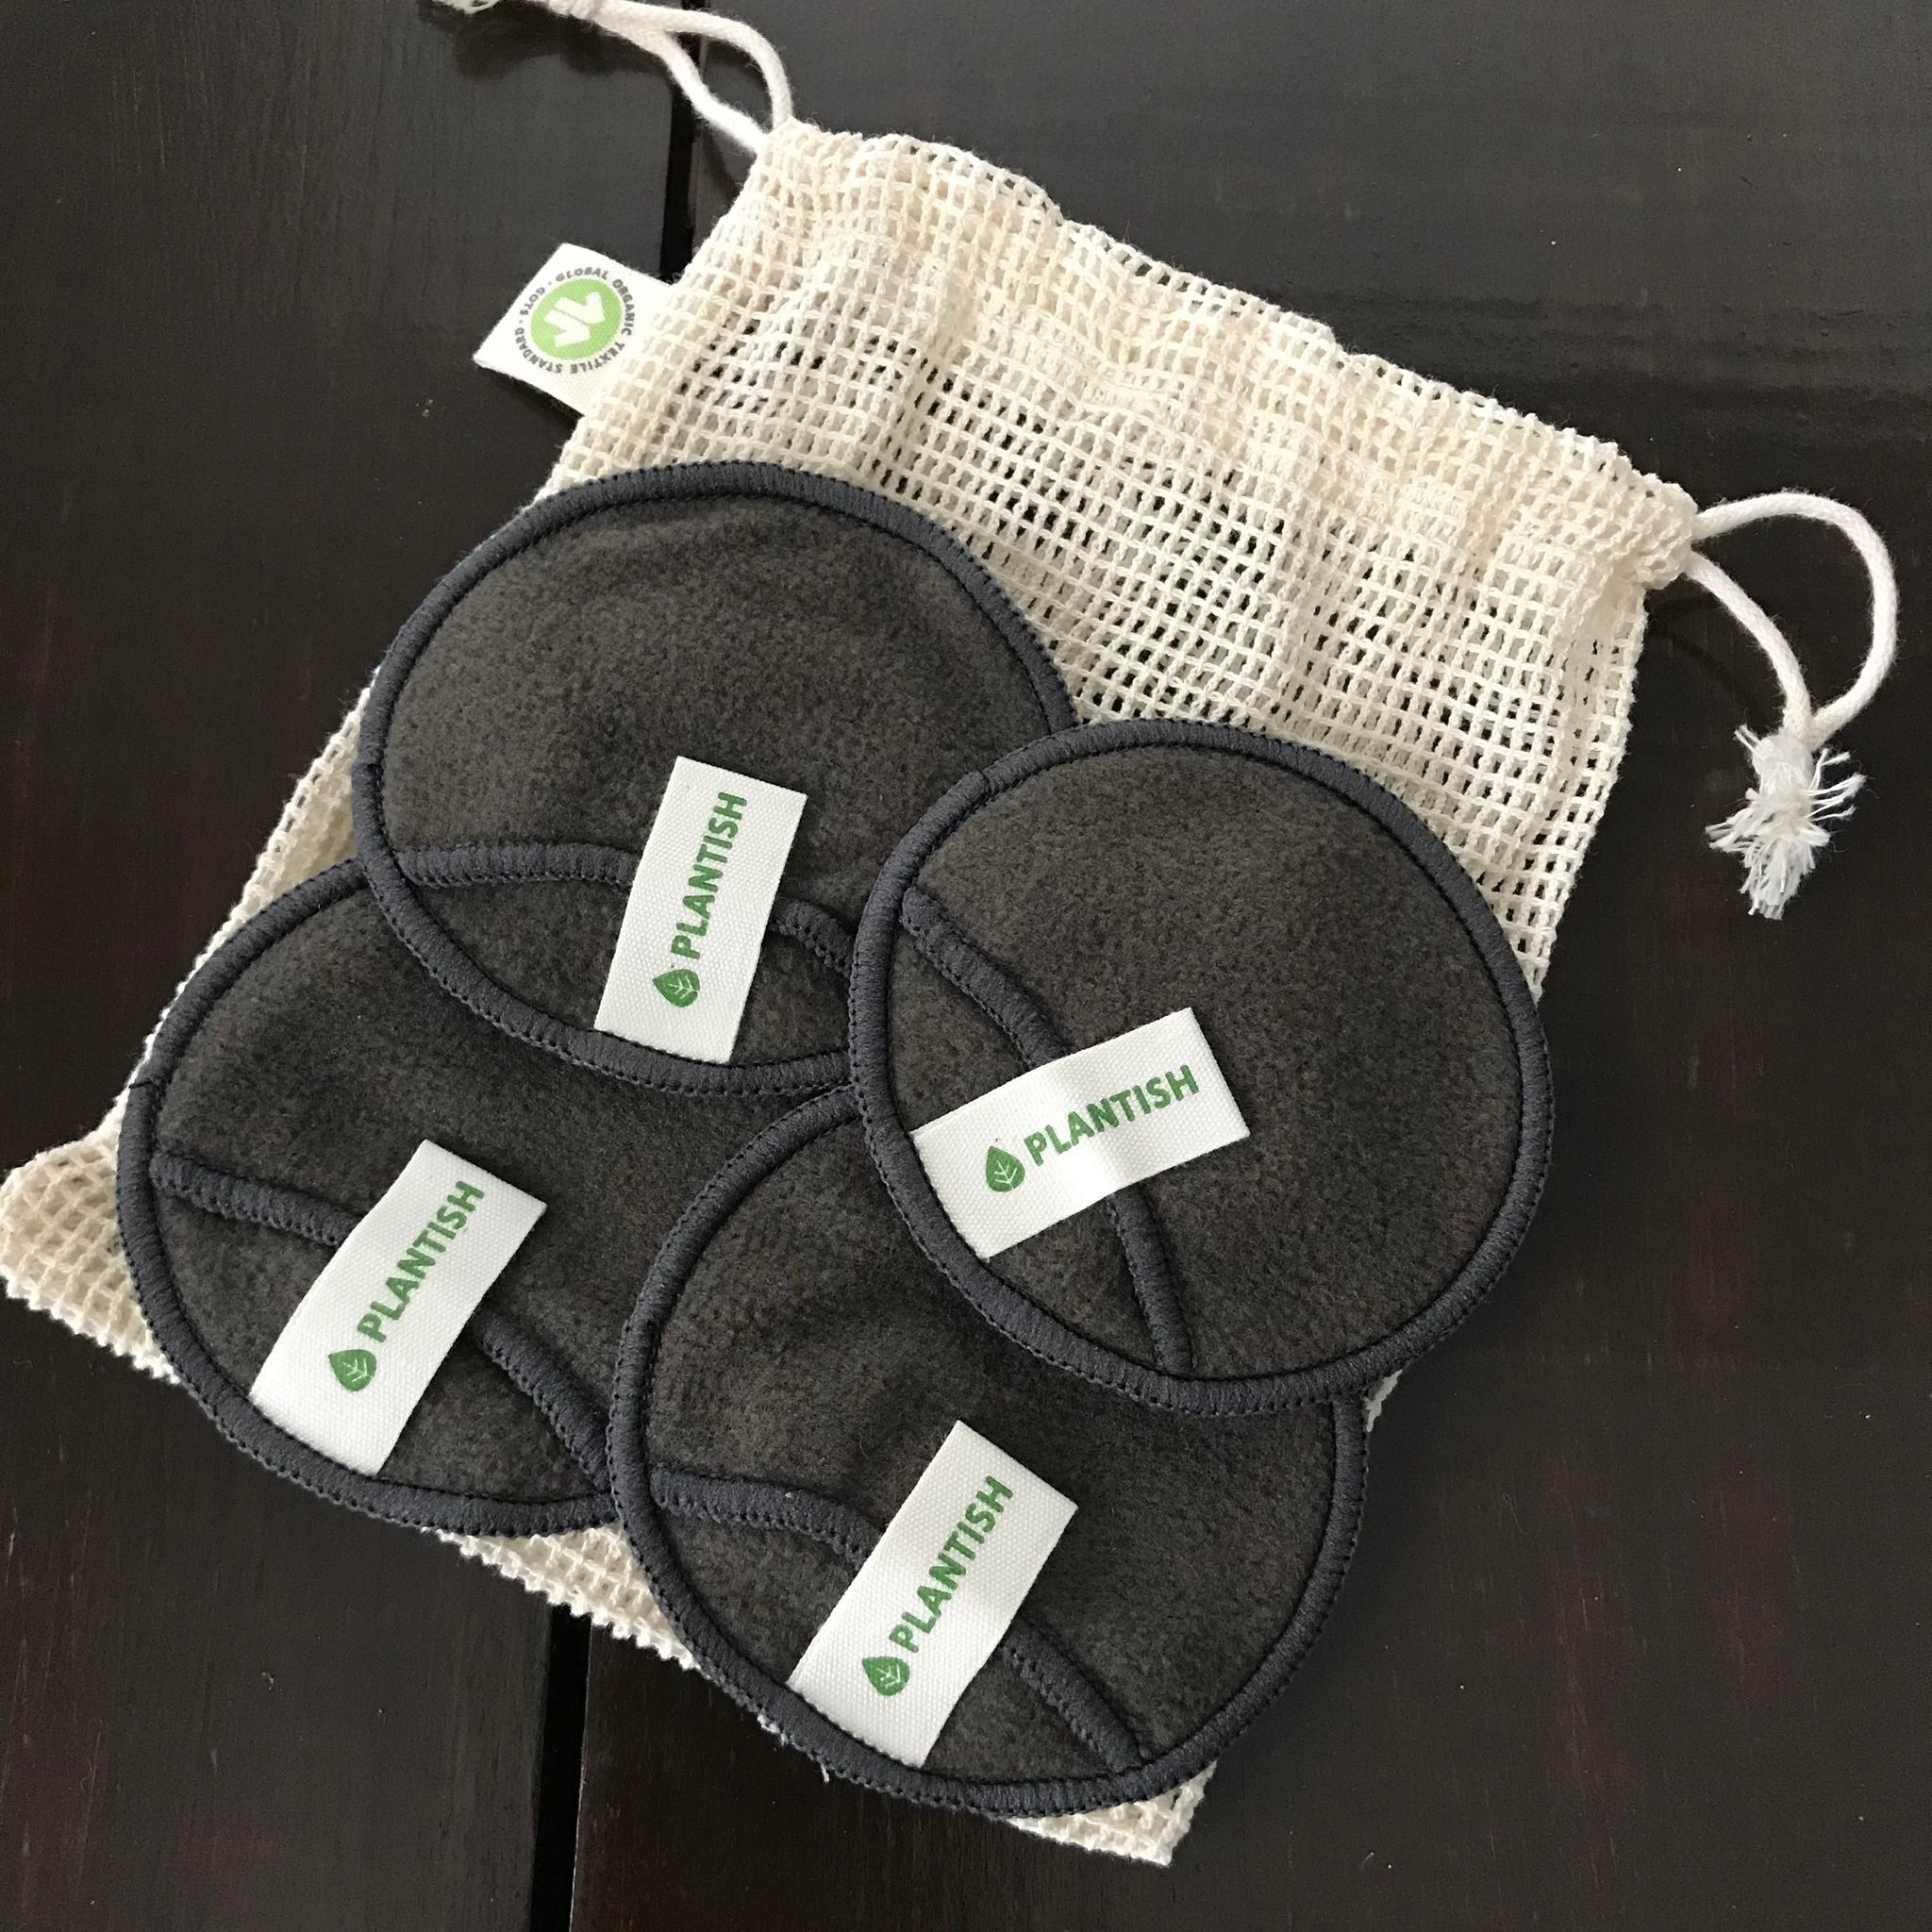 Set of four Plantish bamboo charcoal reusable make up remover pads in an mesh organic cotton bag for washing